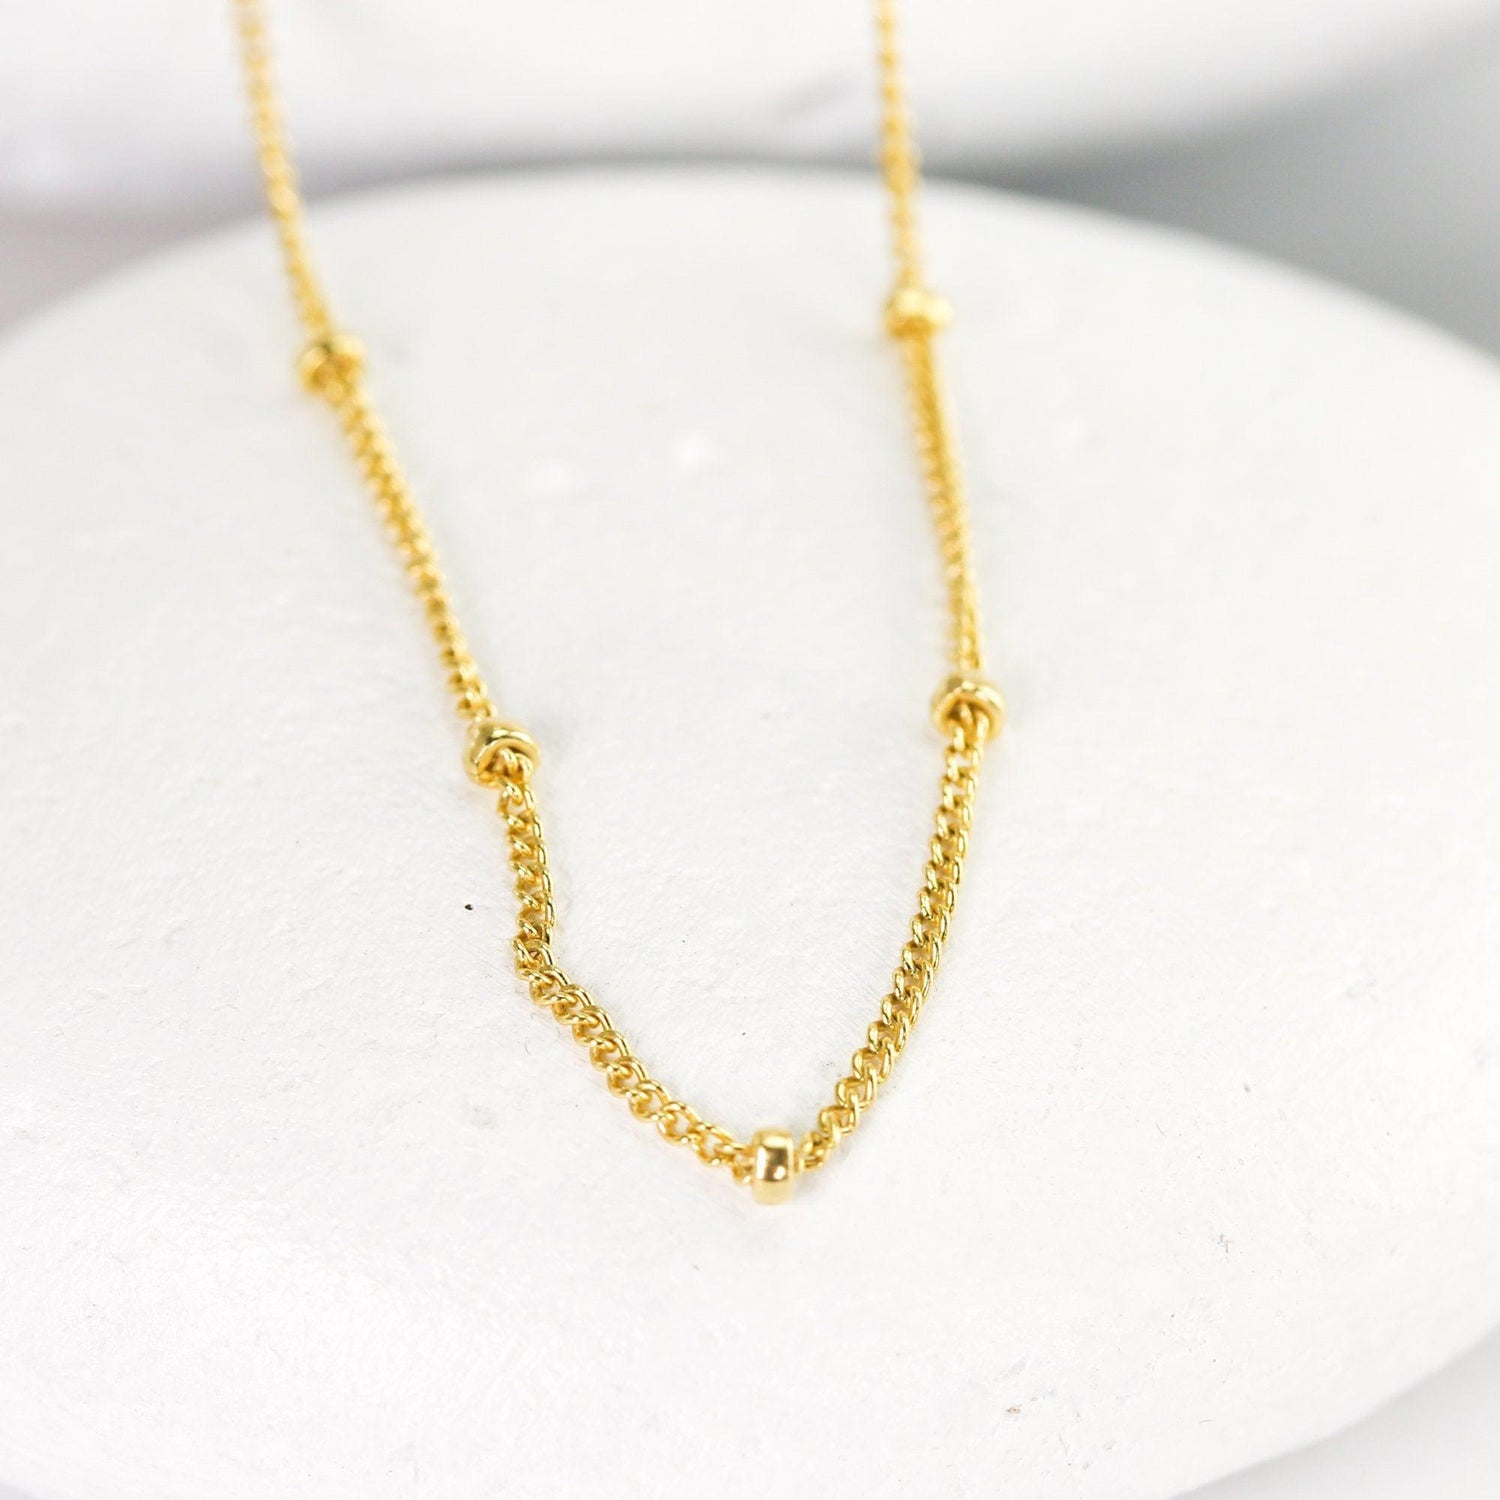 Dainty Beaded Satellite Necklace in Gold Fill